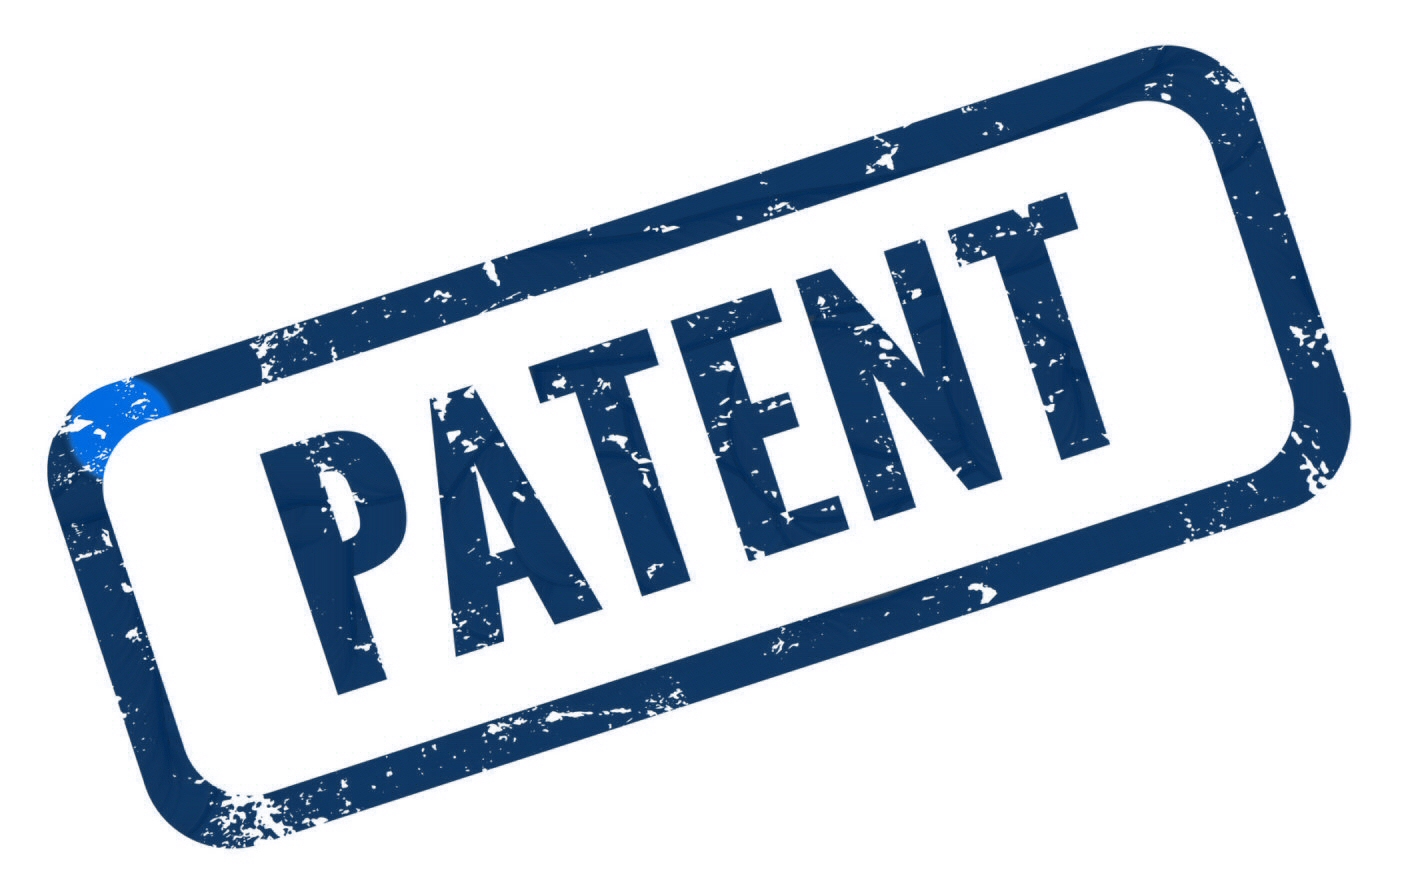 A new patent issued by USPTO on our oleophobic and hydrophobic coatings